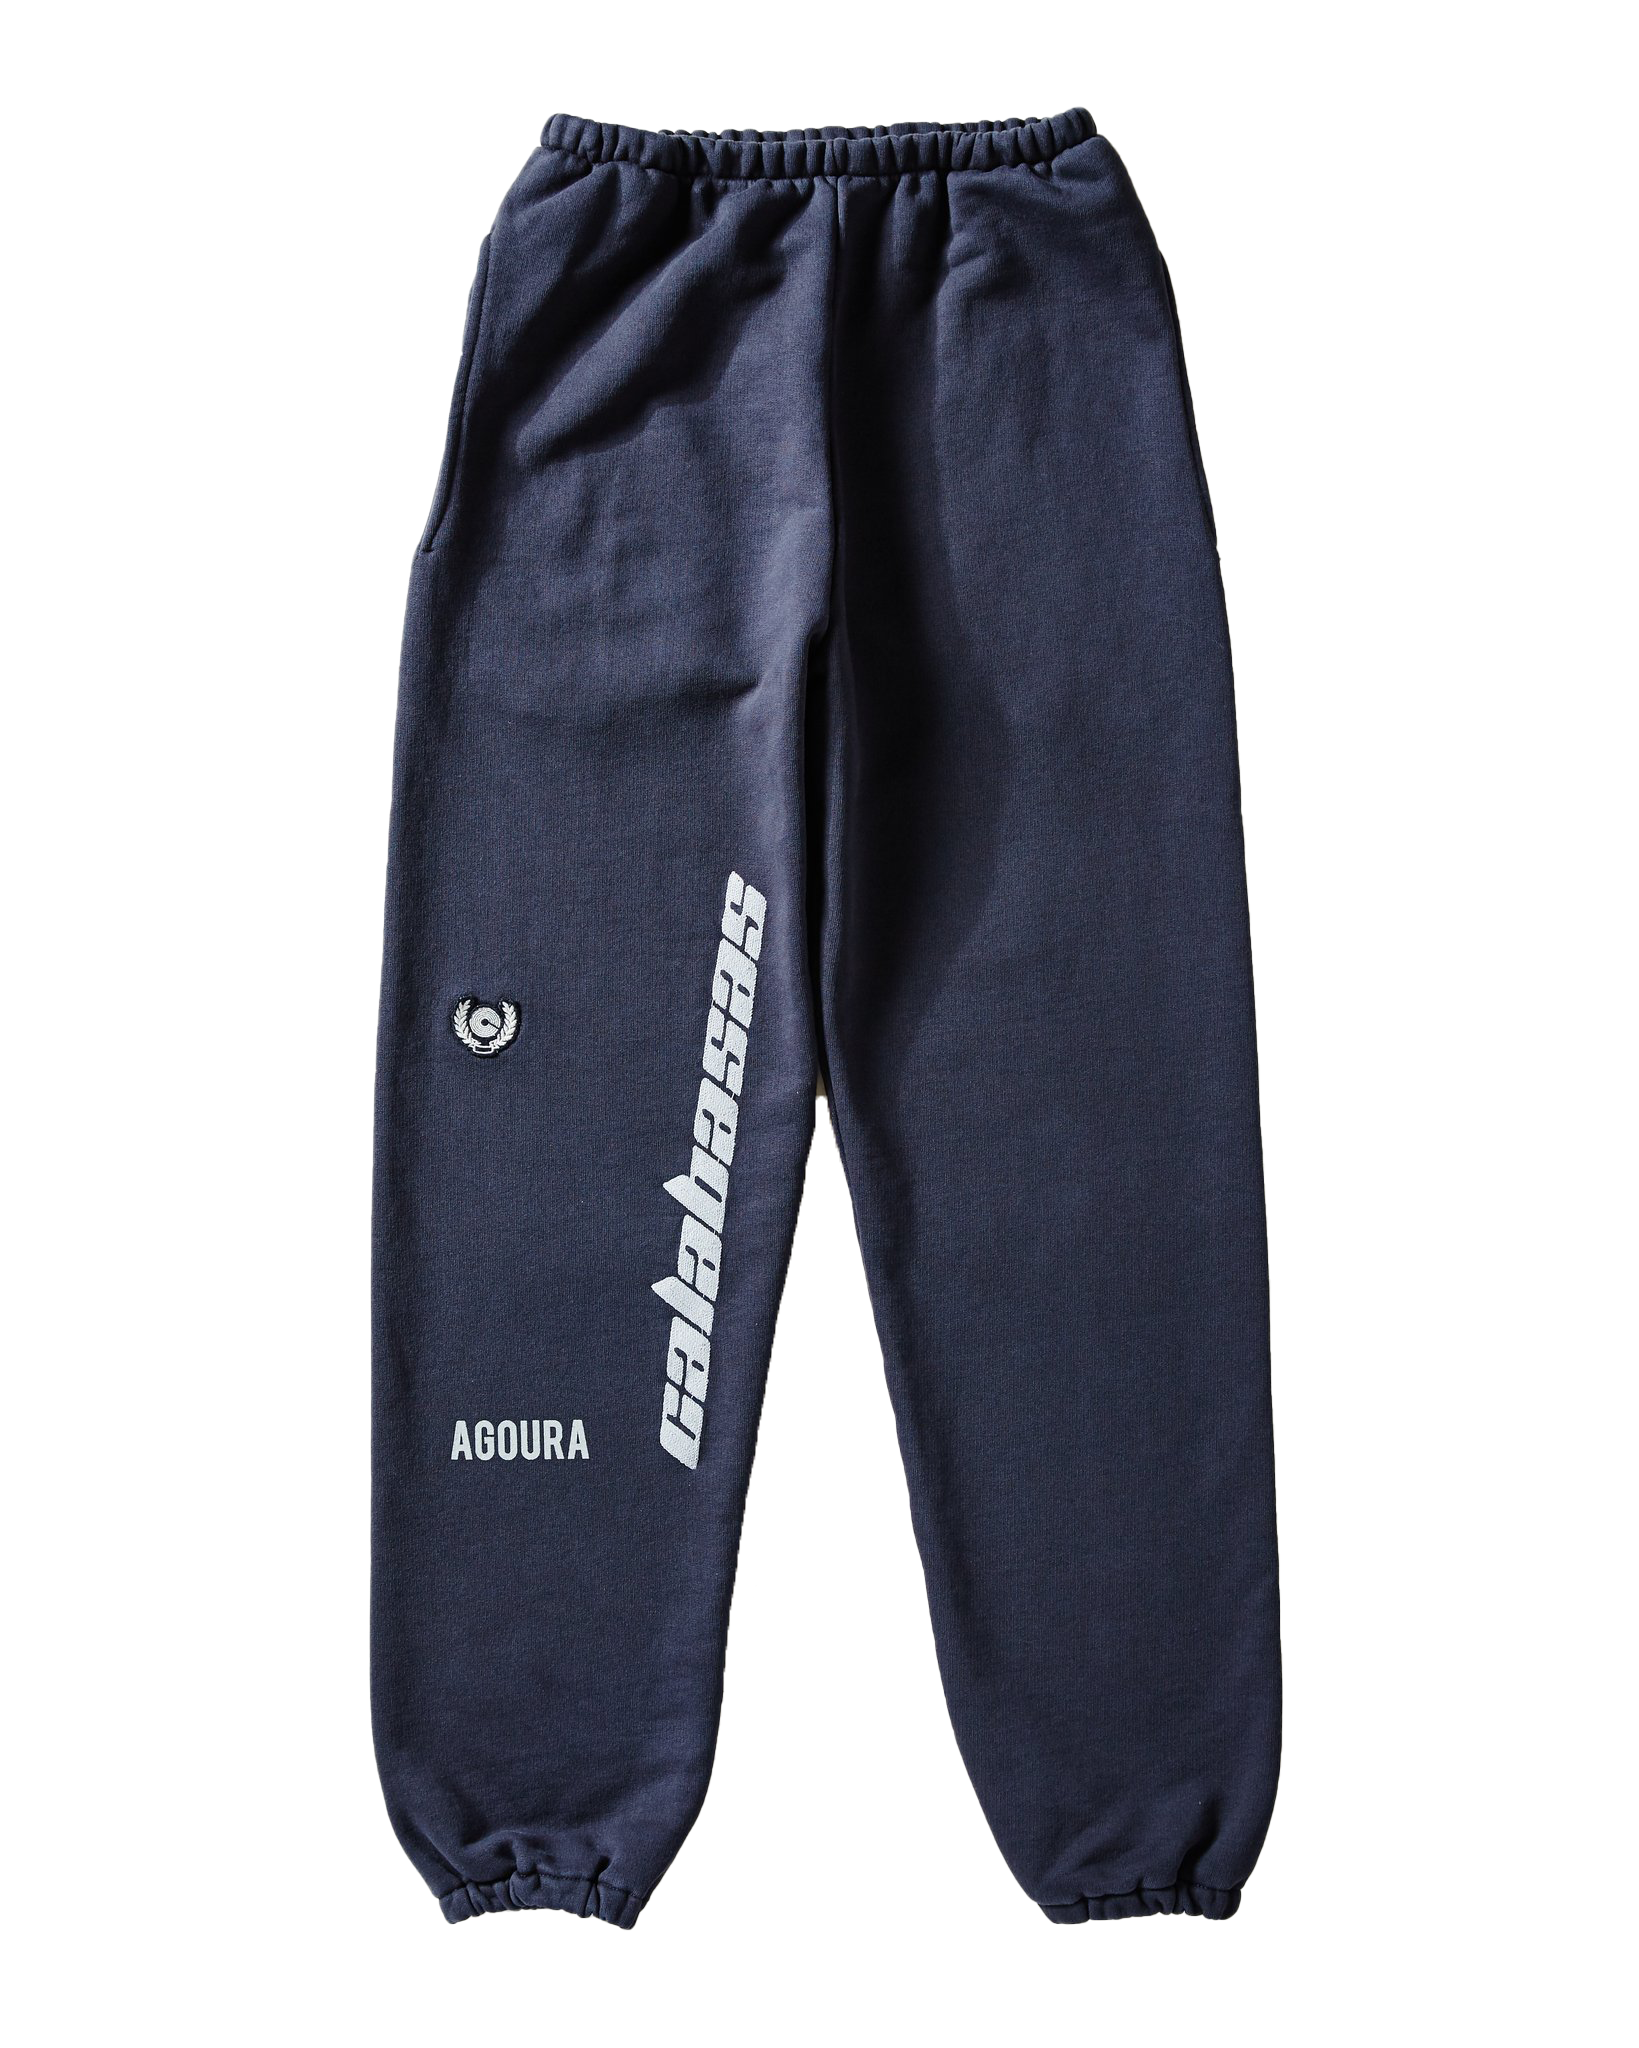 adidas Yeezy Calabasas Embroidered French Terry Pants Grace - Novelship